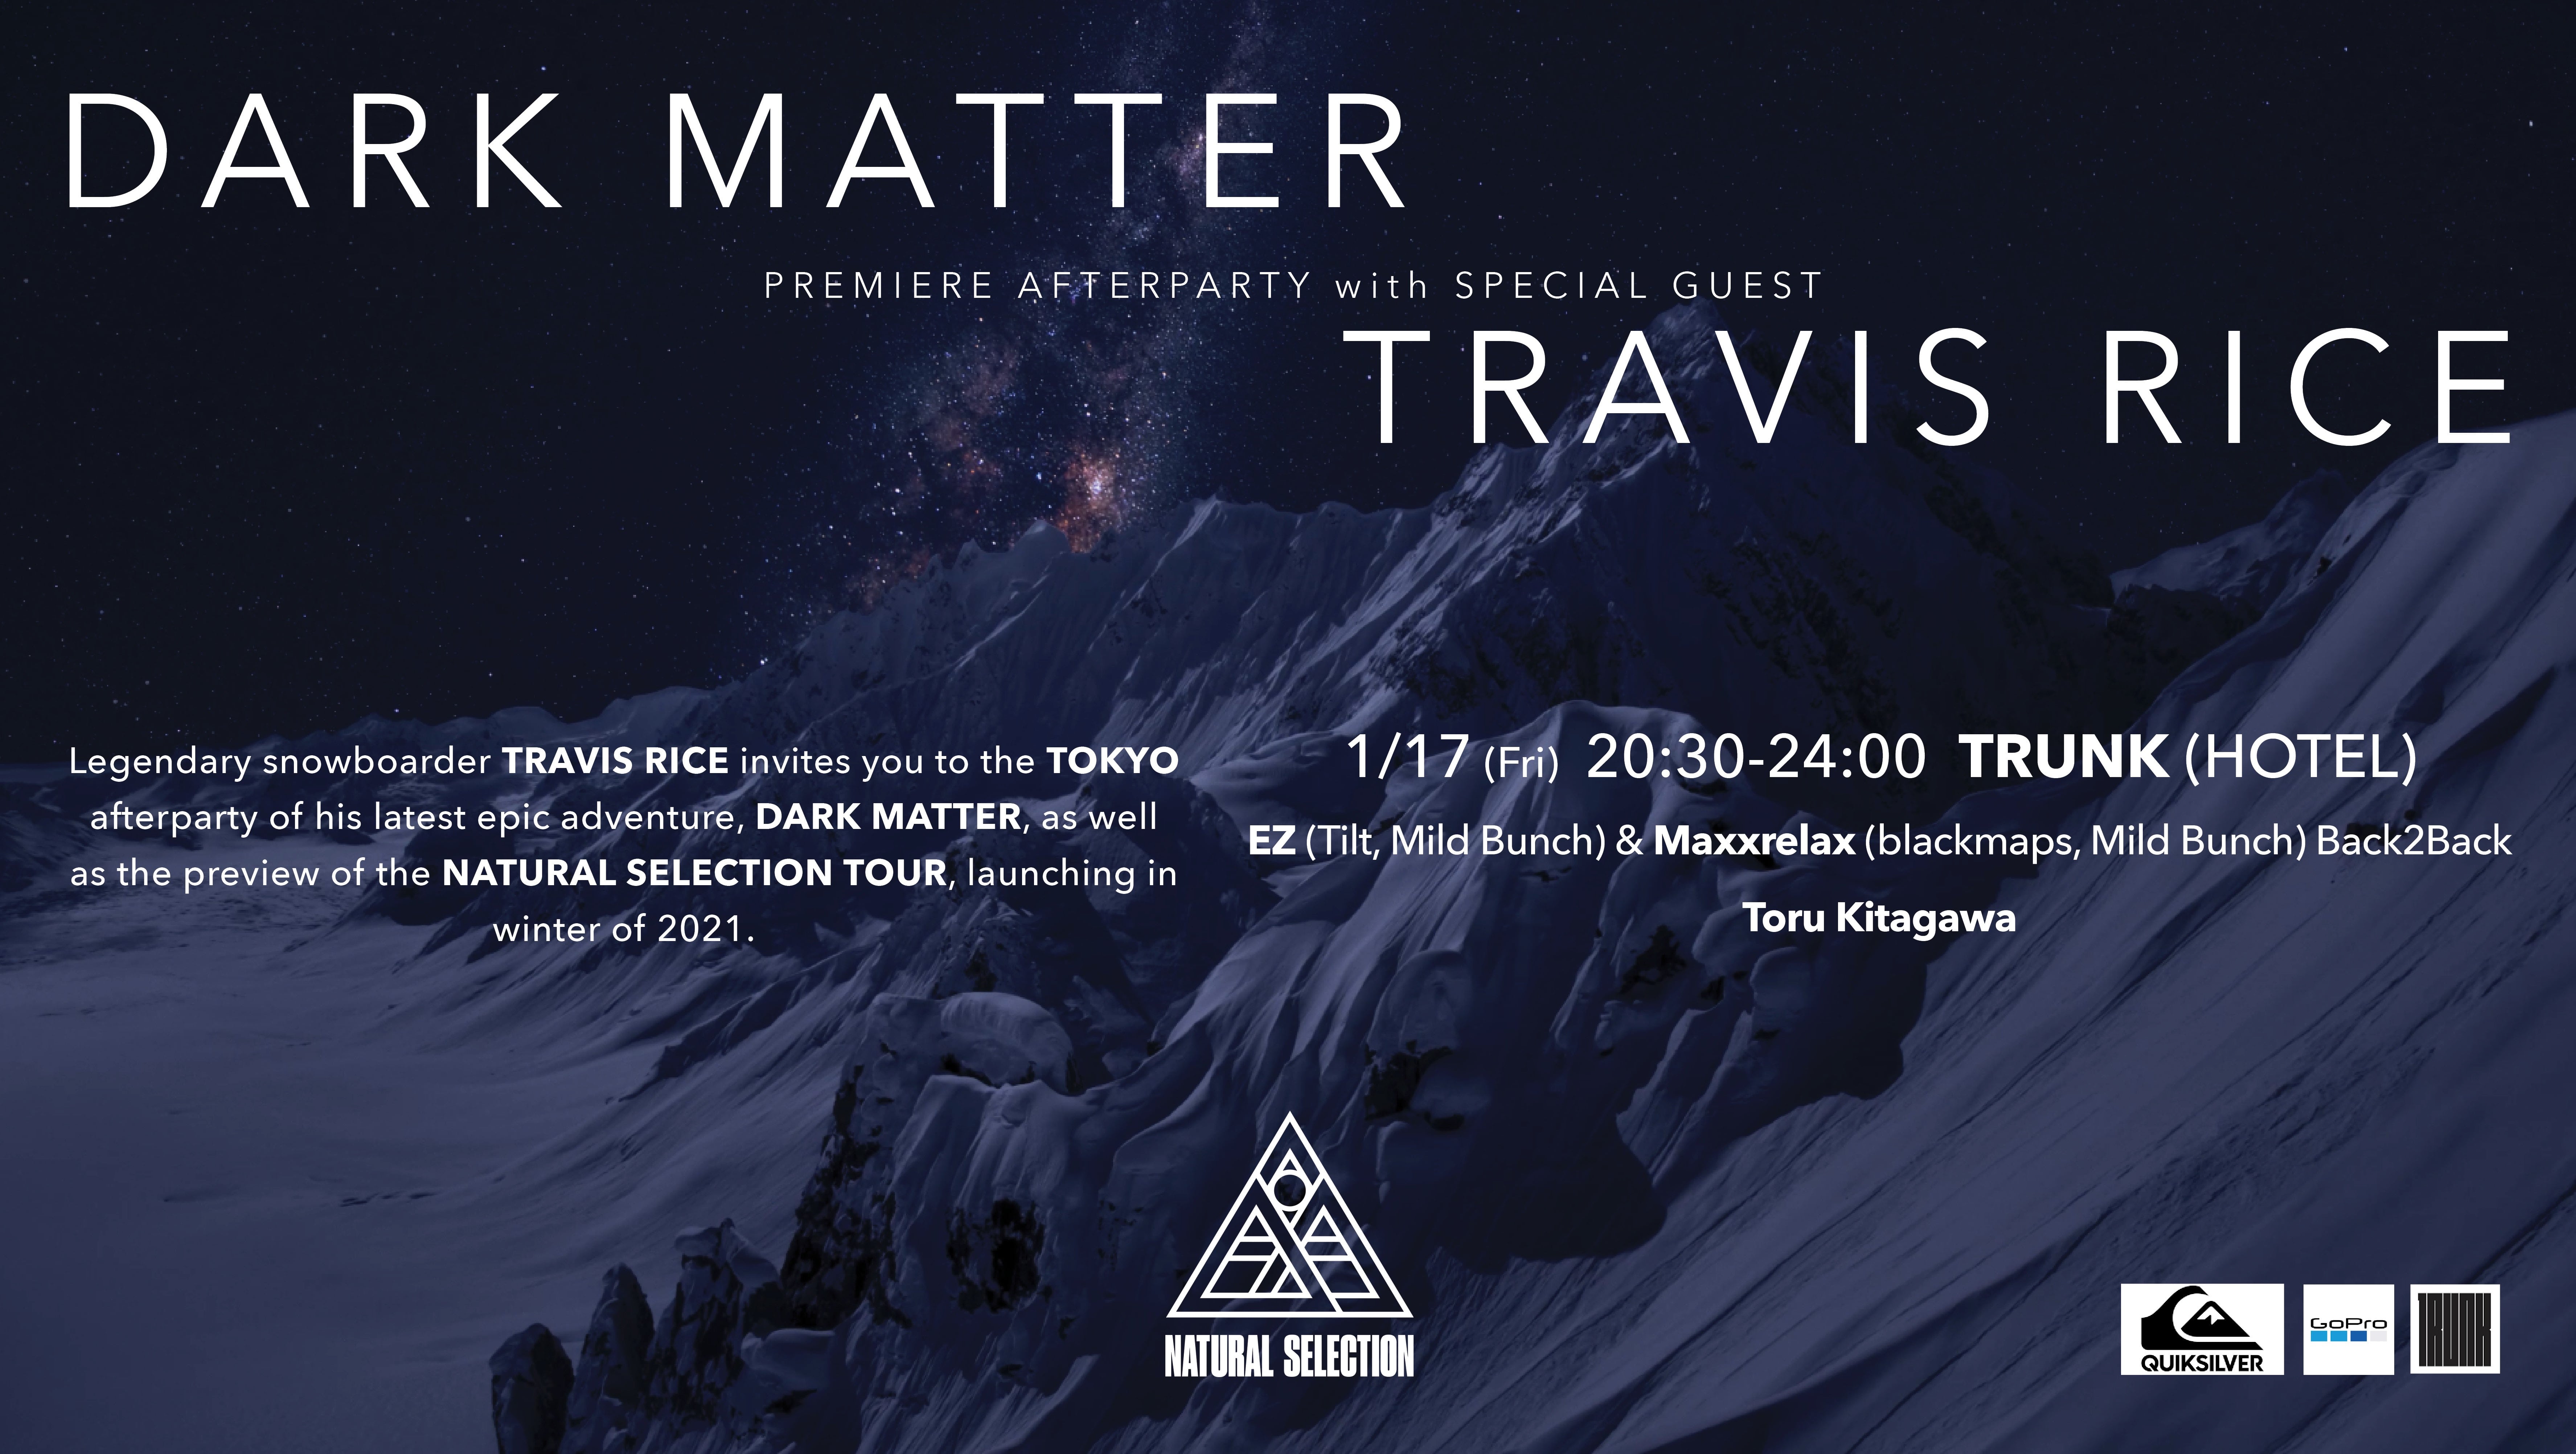 DARK MATTER Premiere Afterparty with Travis Rice